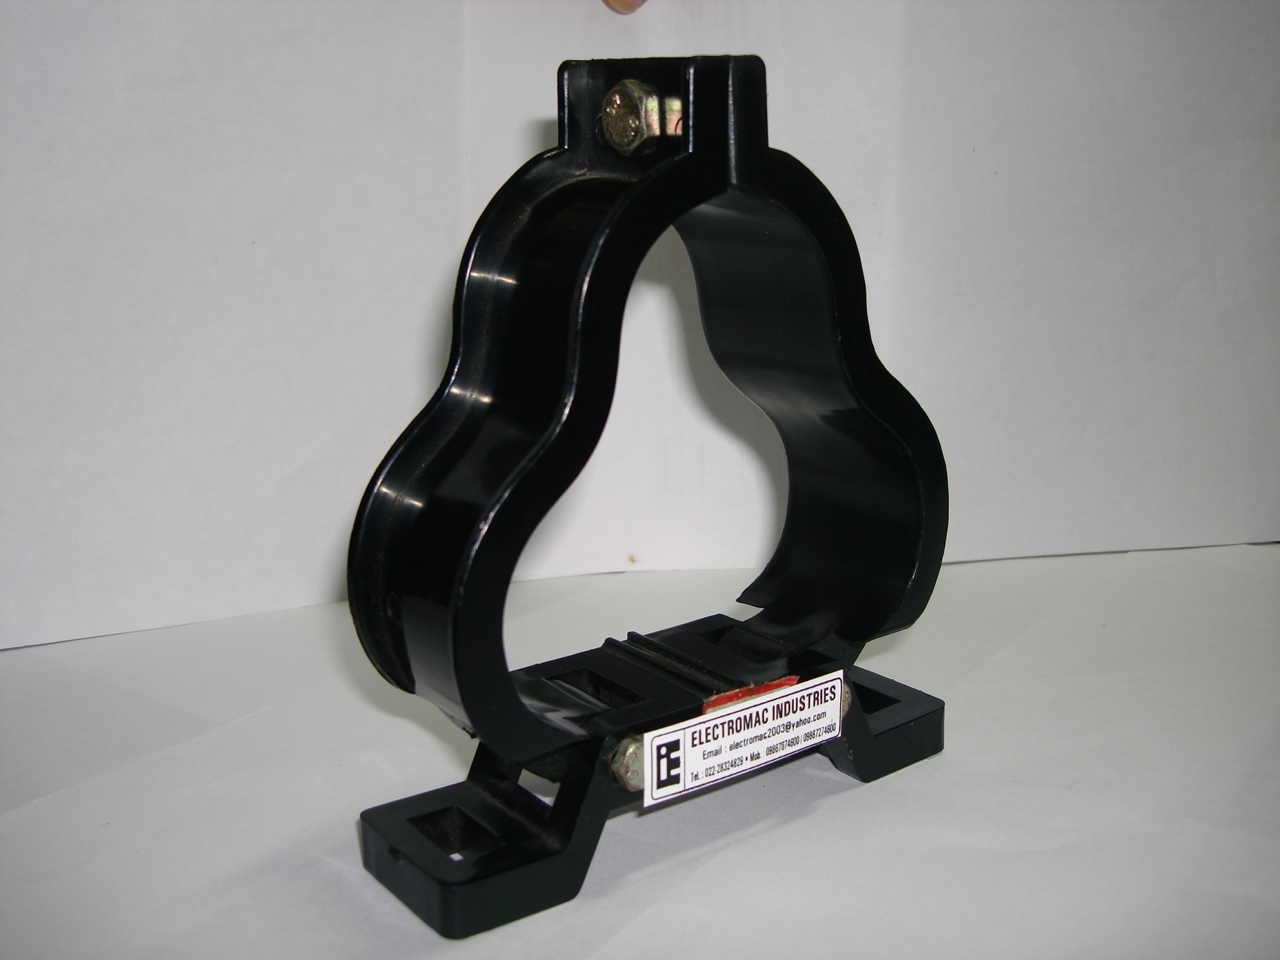 Trefoil Cleat Clamp